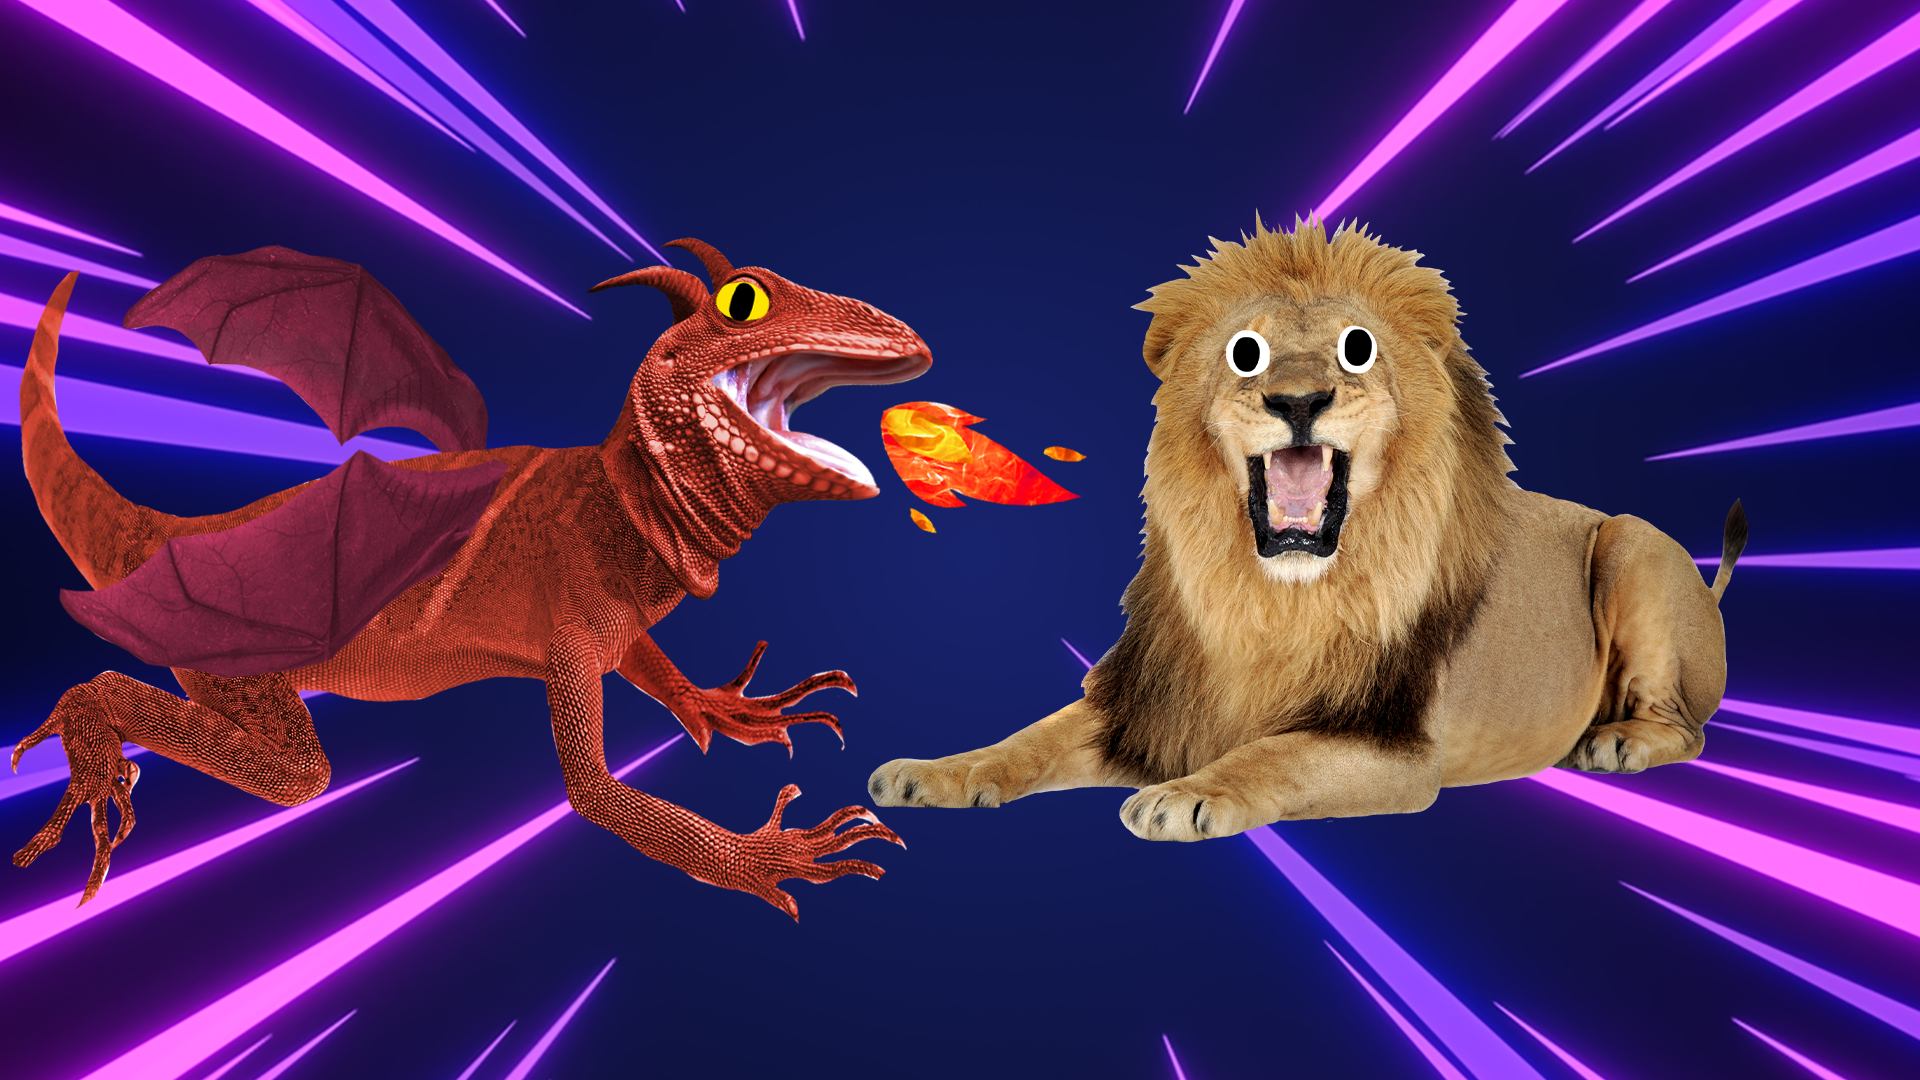 Dragon and lion on laser background